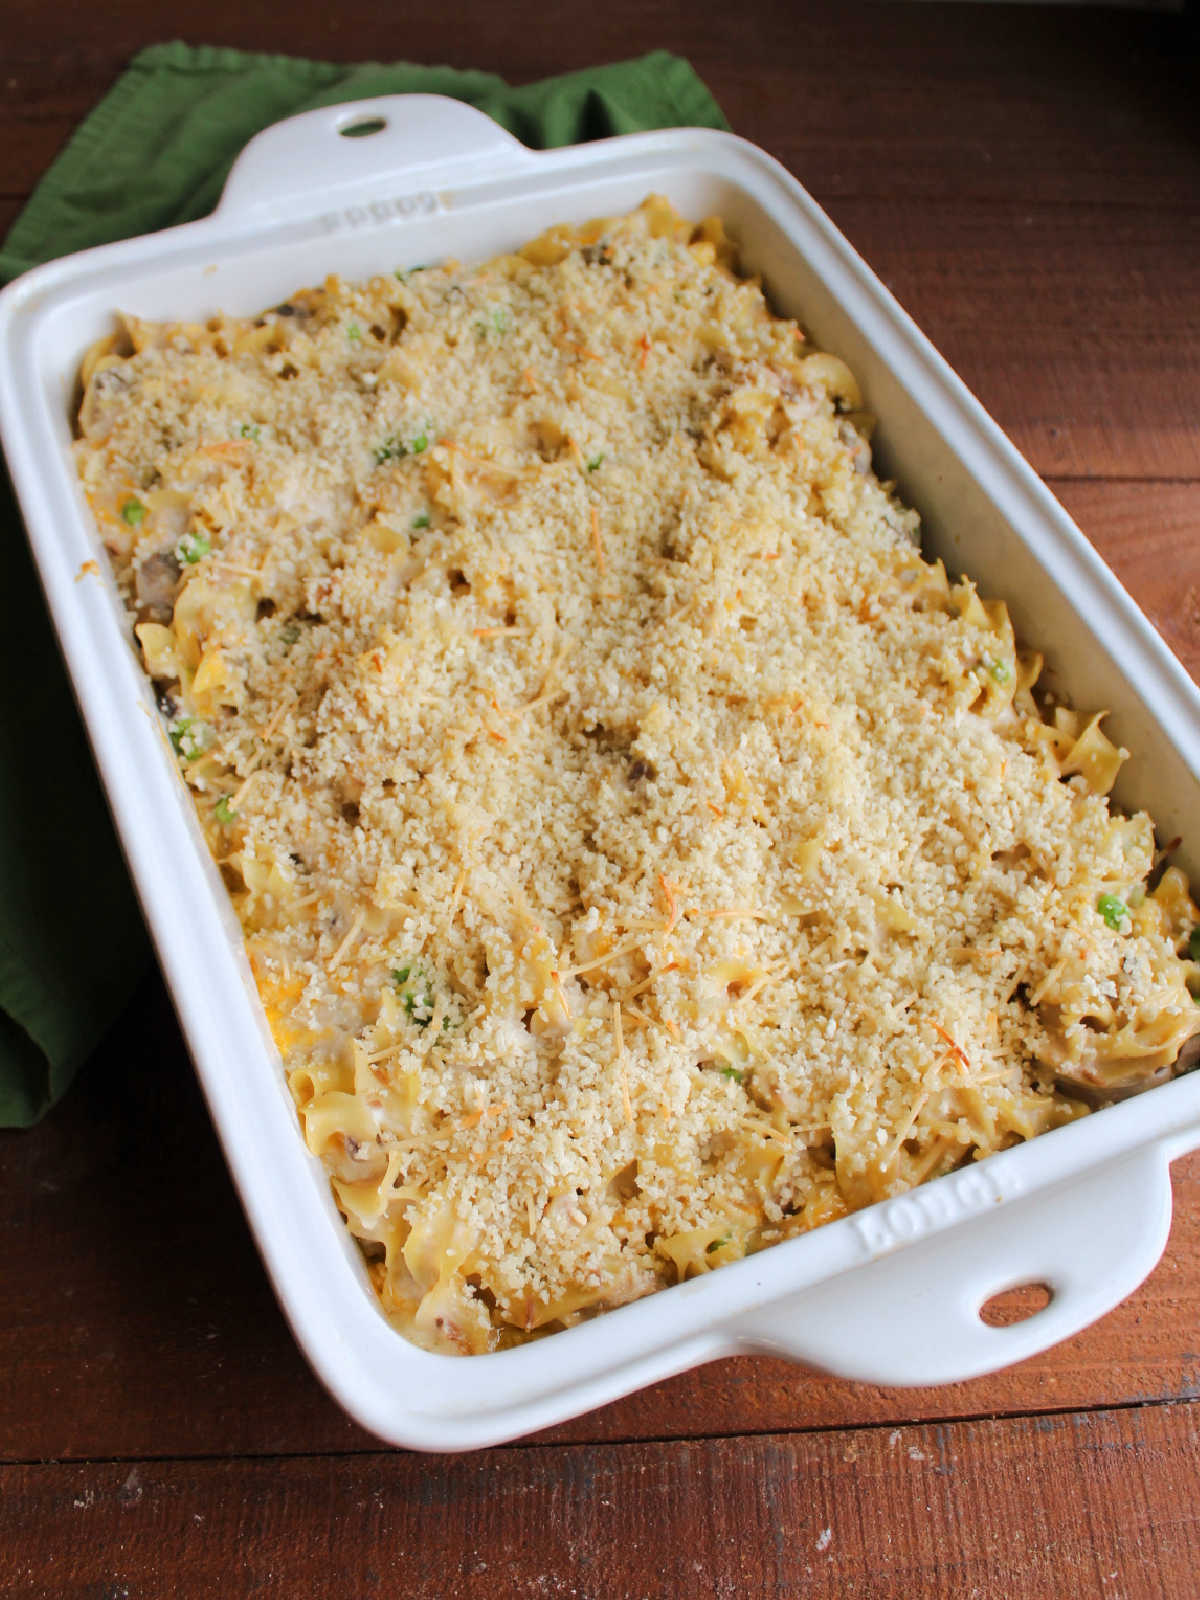 Freshly baked tuna noodle casserole showing browned bread crumb topping.